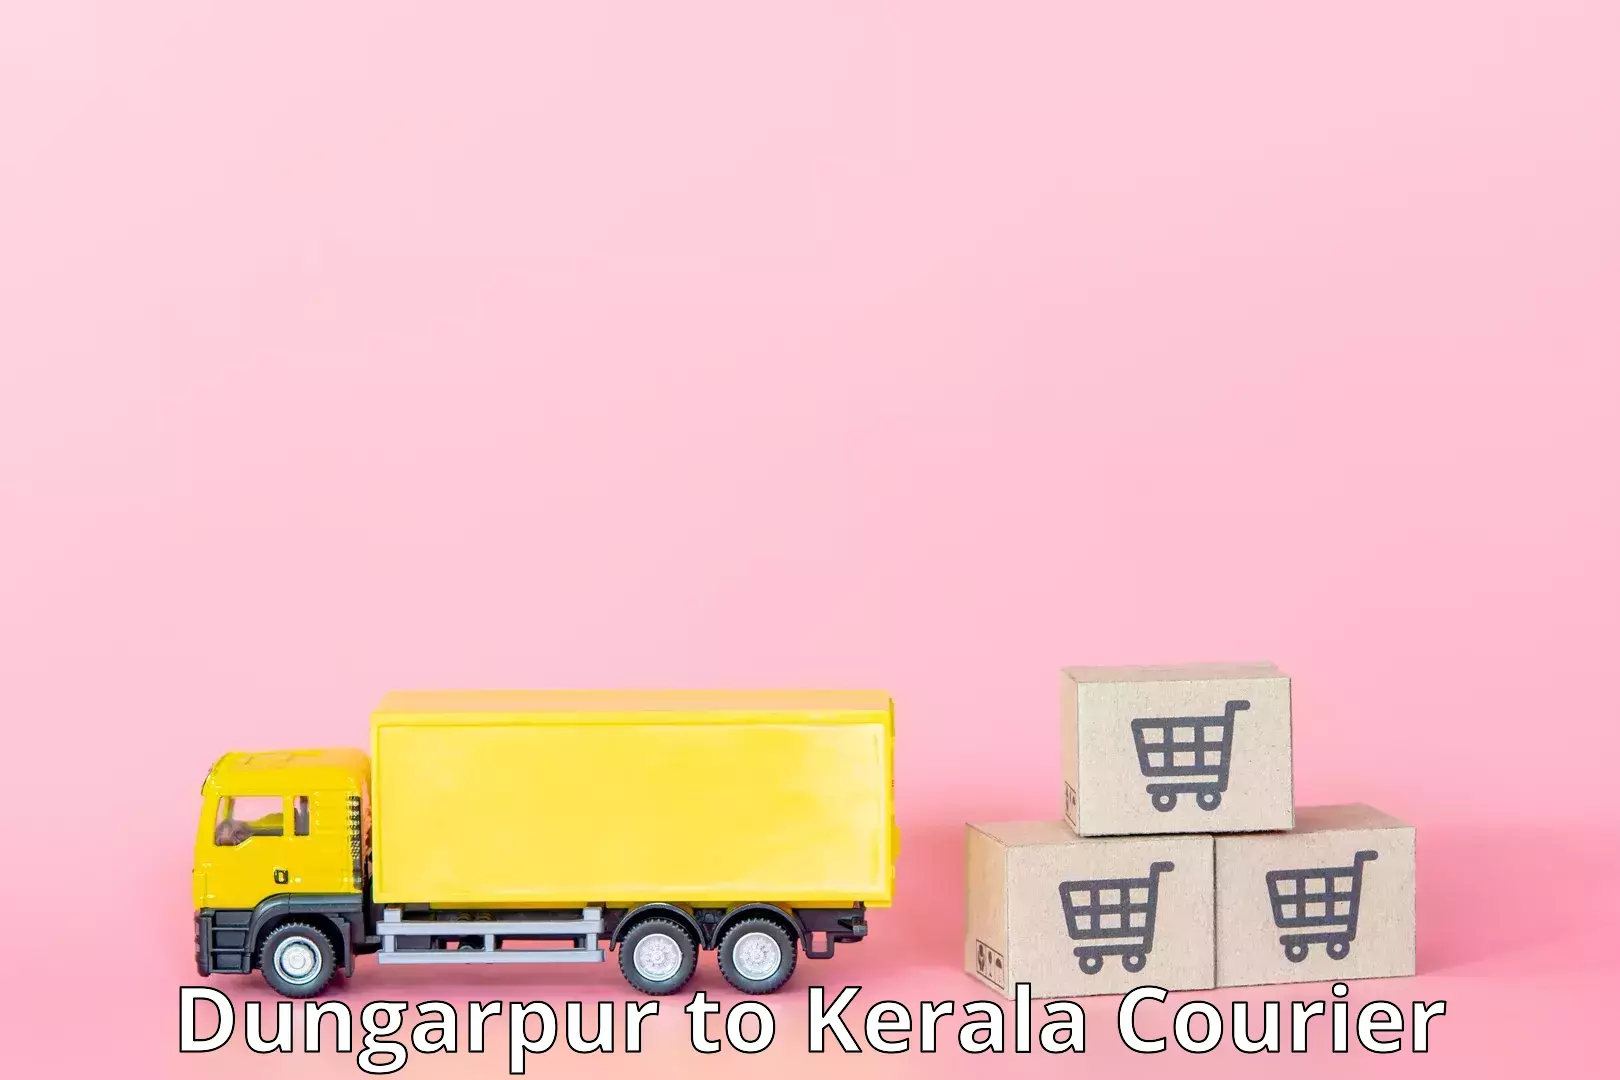 High-speed parcel service Dungarpur to Kanjirapally